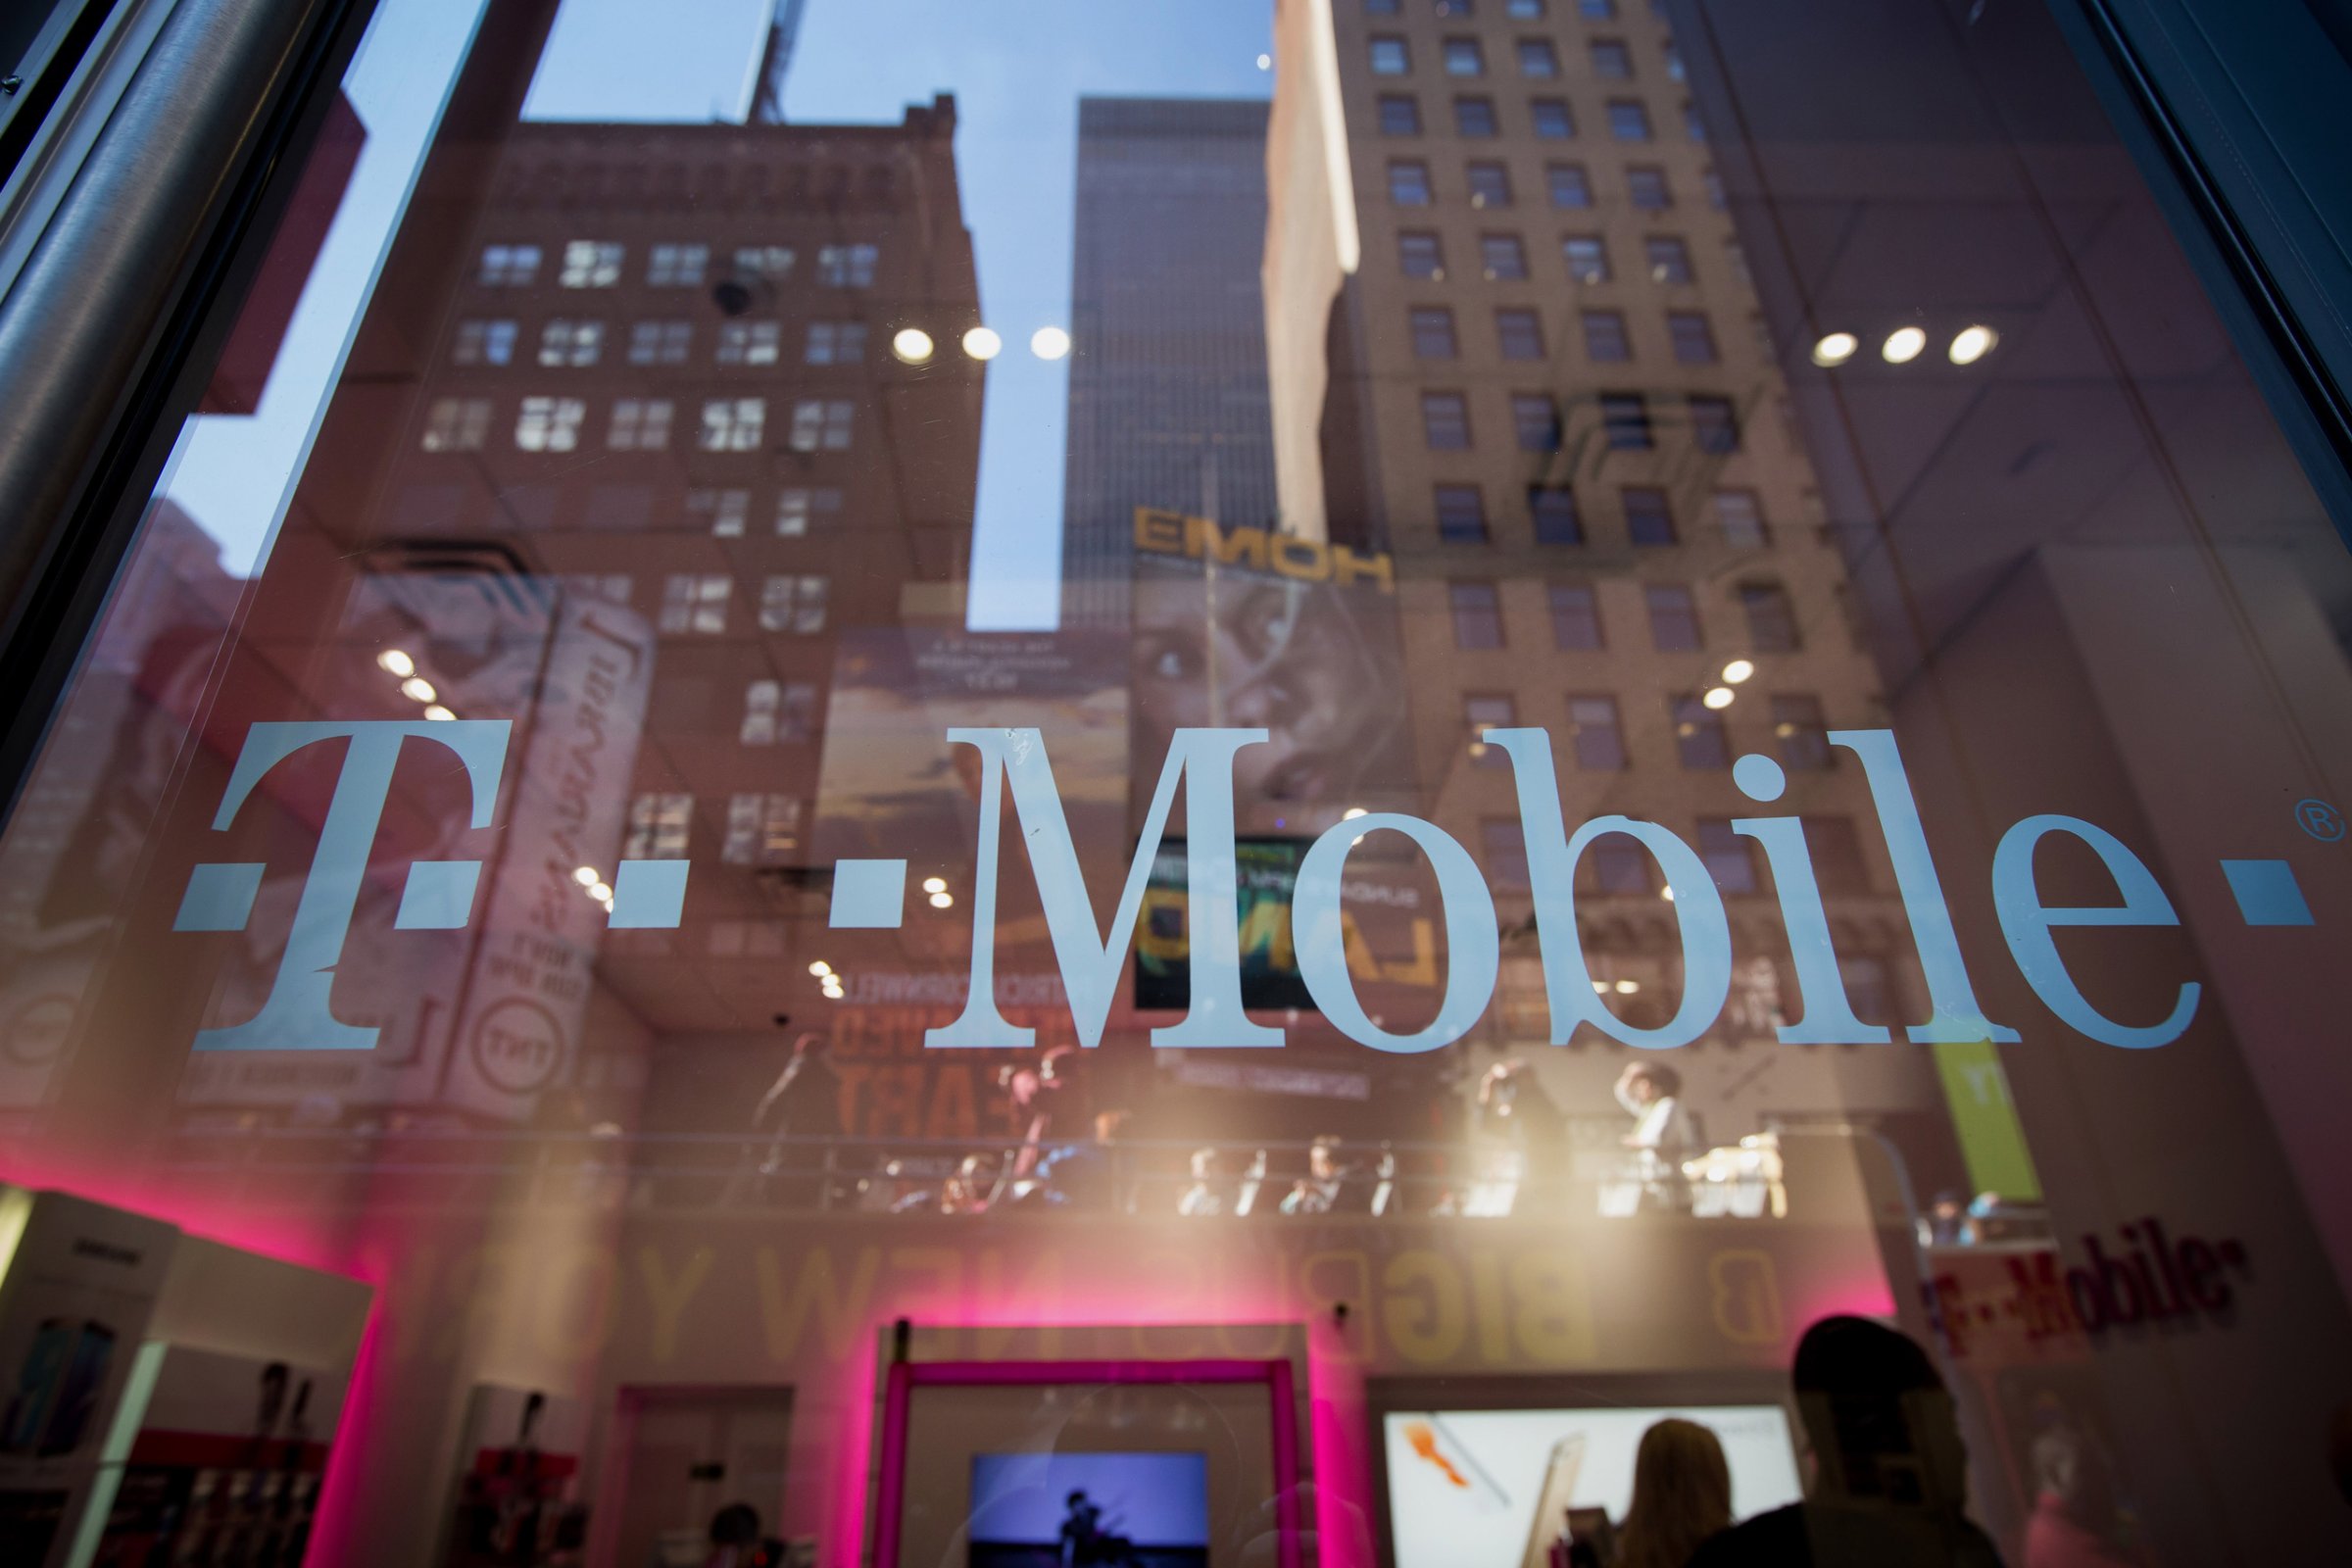 The T-Mobile US Inc. logo is displayed on a door at a T-Mobile US Inc. store in New York, U.S., on Monday, Oct. 26, 2015. T-Mobile US Inc. is scheduled to release earnings figures on October 27. Photographer: Michael Nagle/Bloomberg via Getty Images